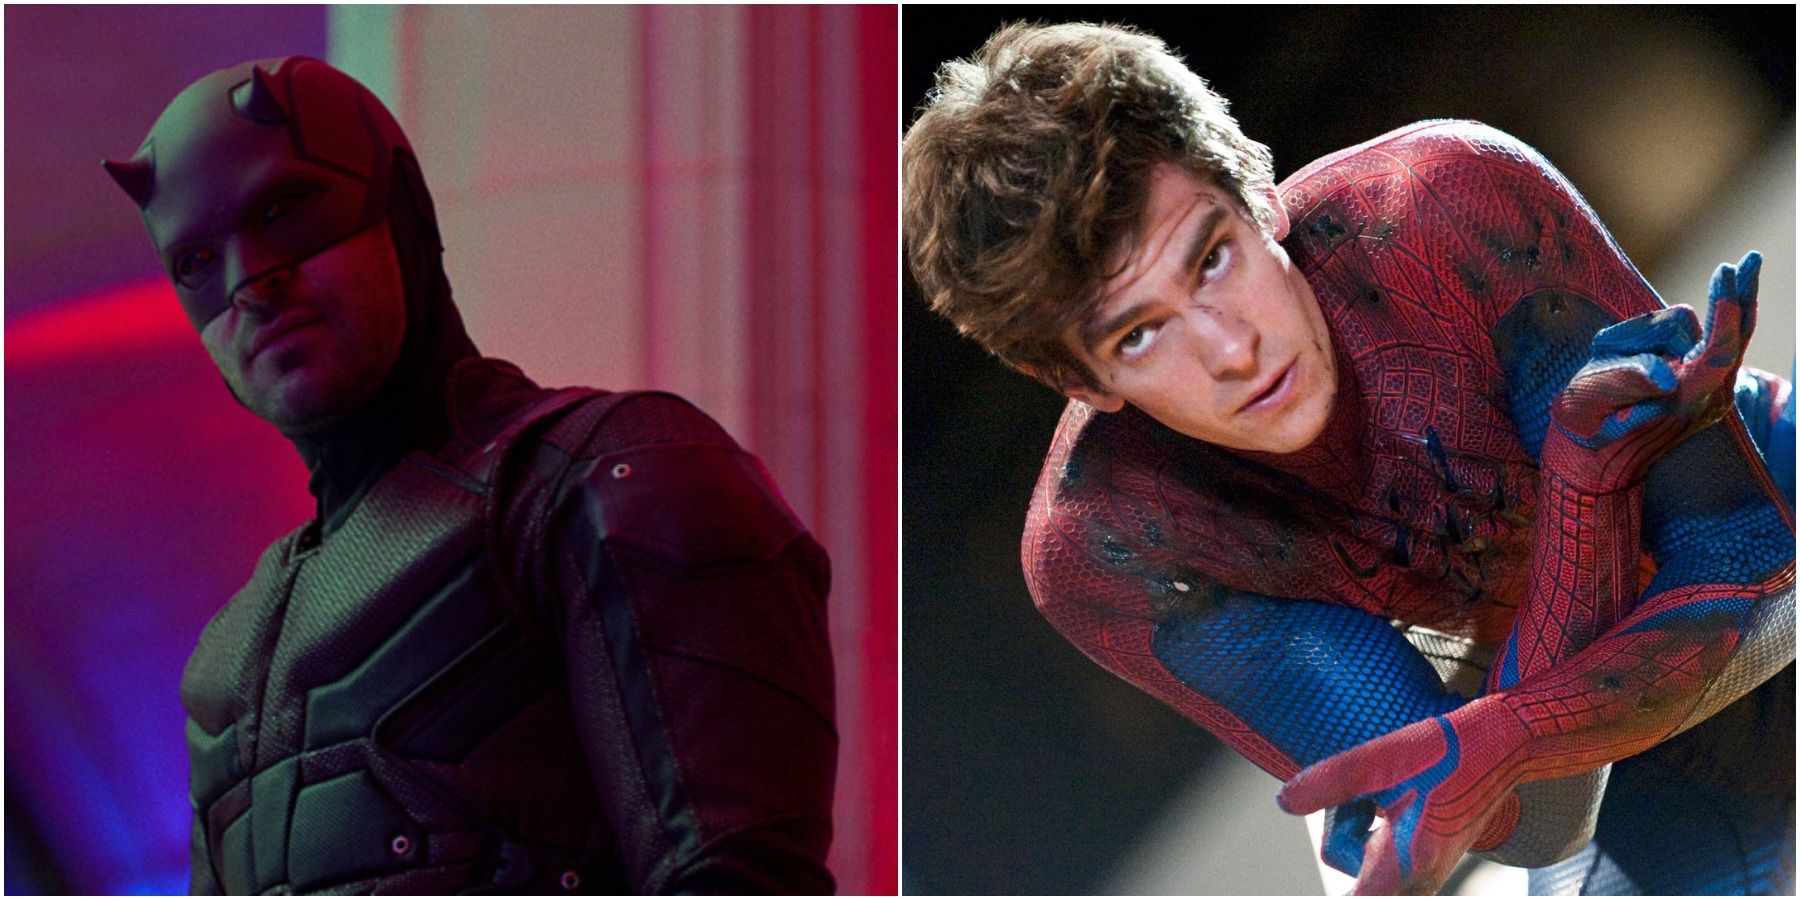 Daredevil in the Netflix series and Andrew Garfield's Spider-Man